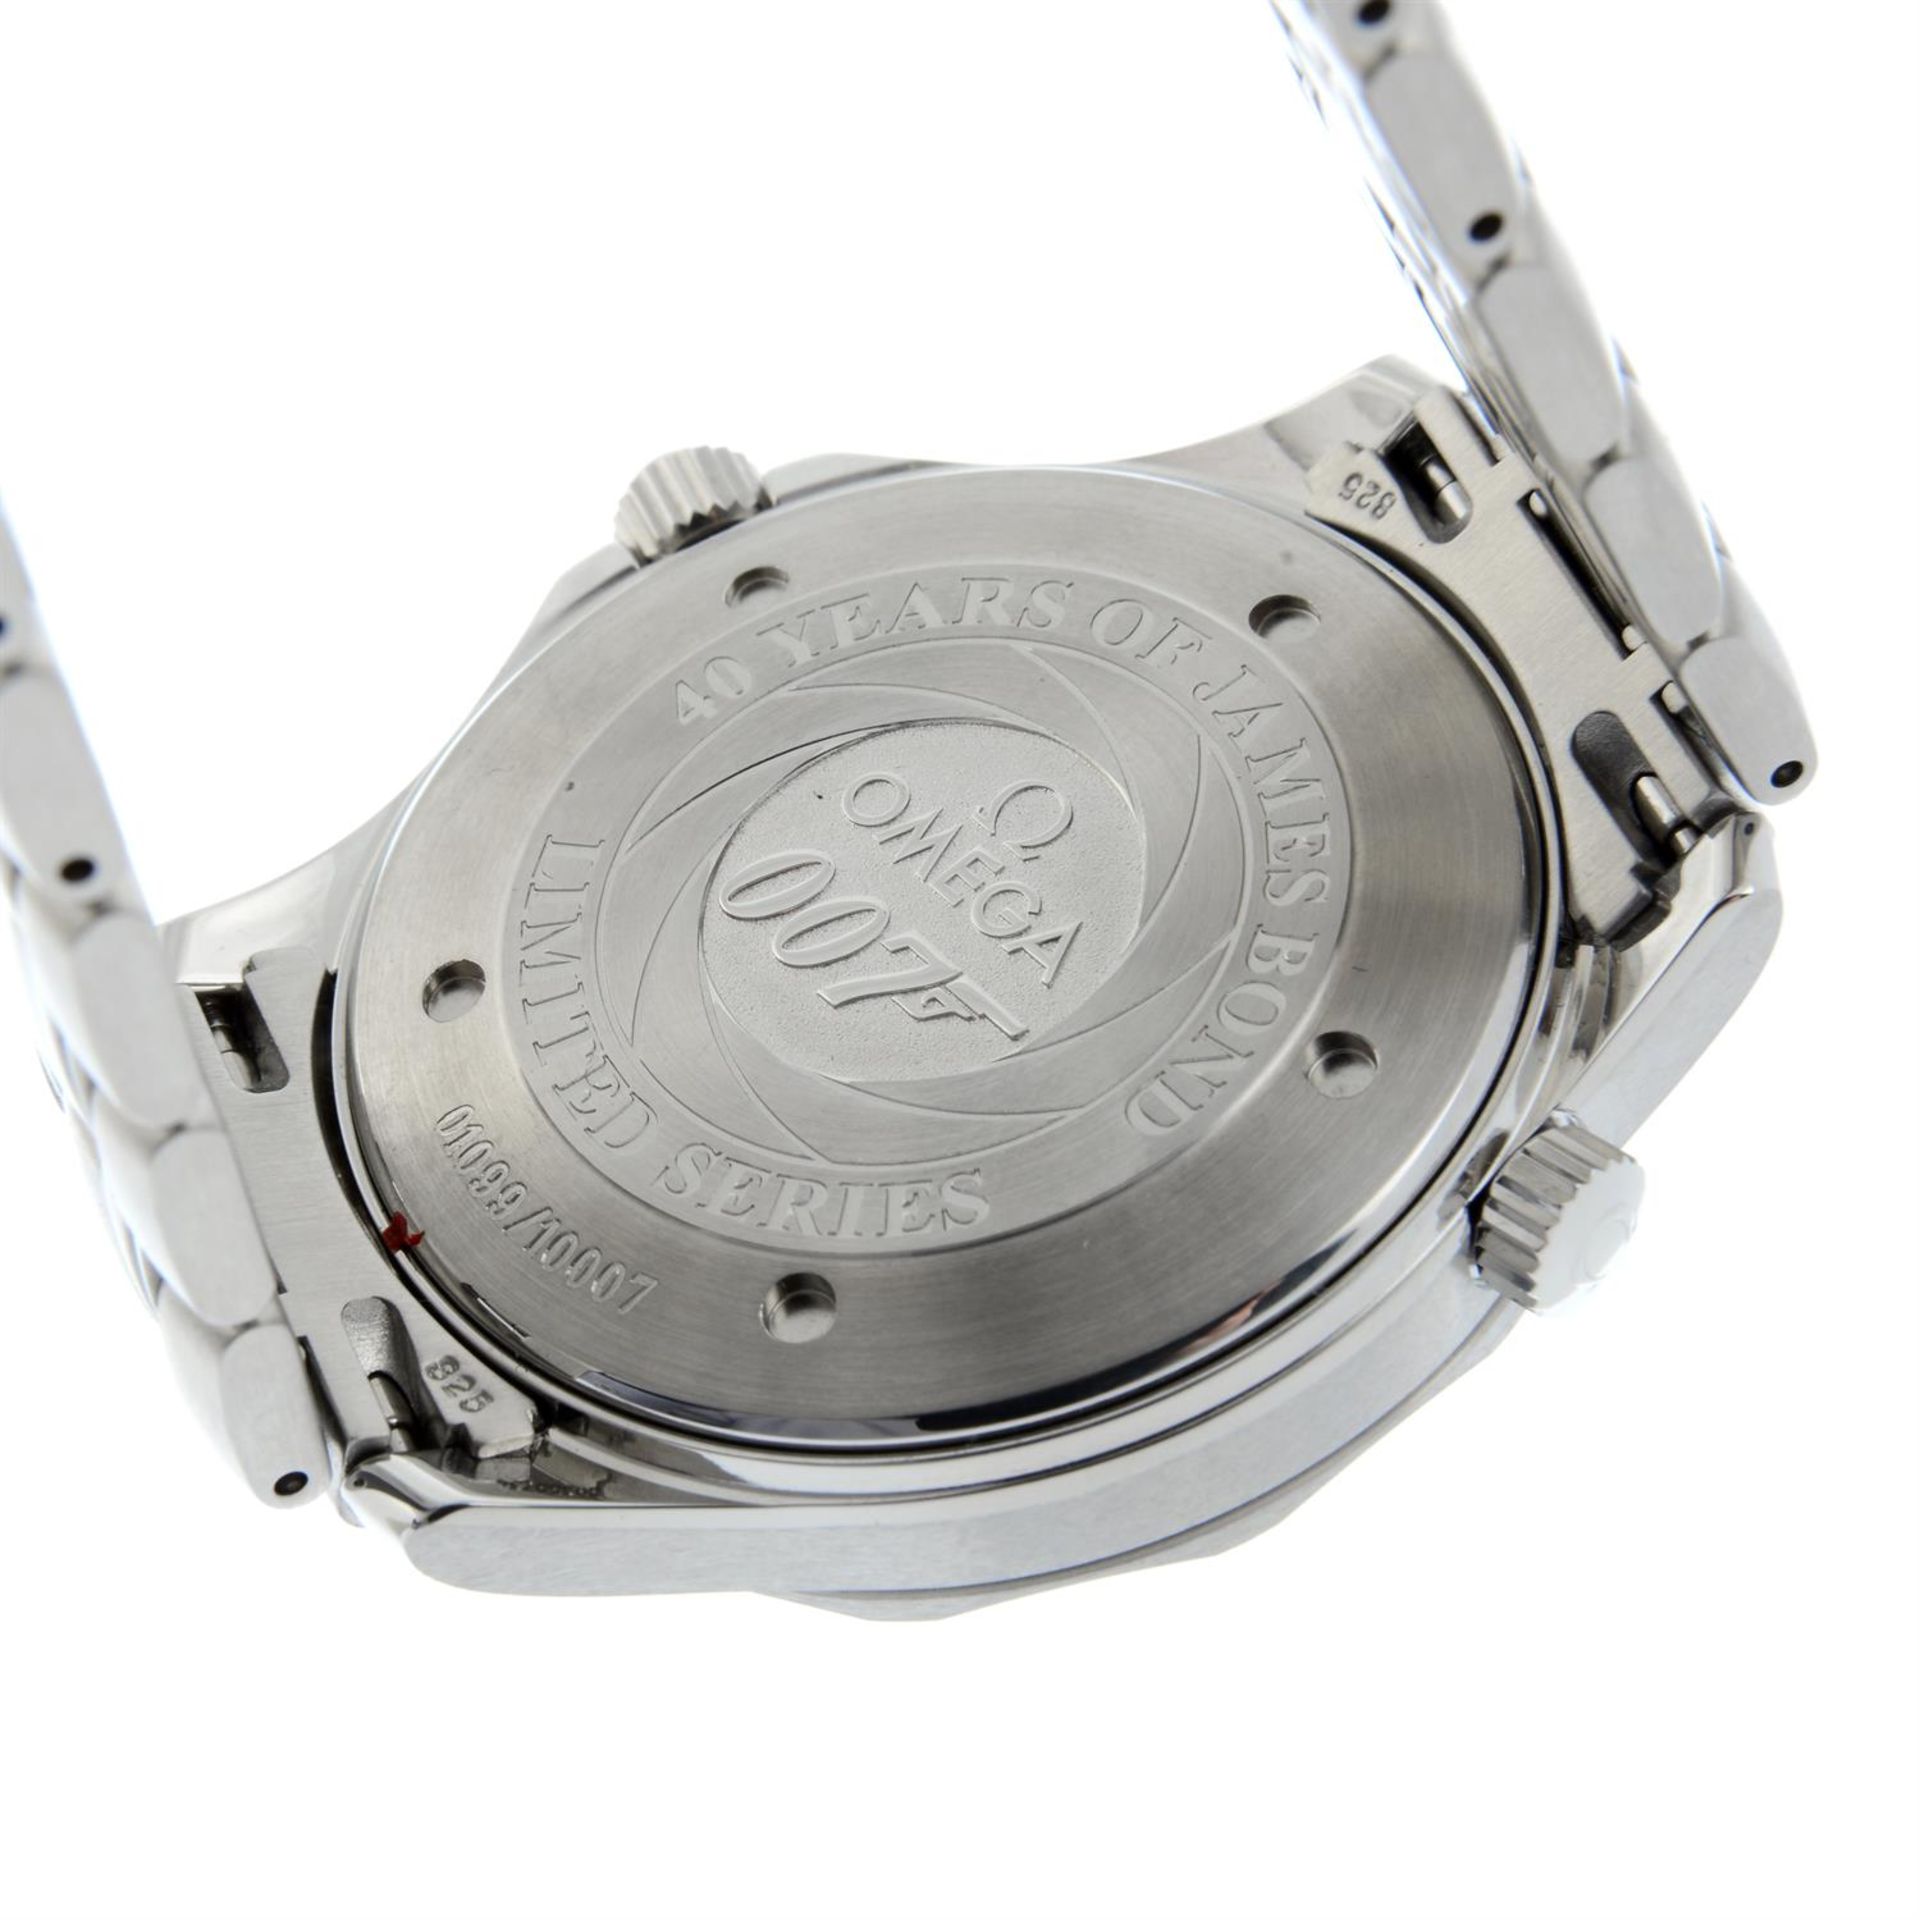 OMEGA - a limited edition stainless steel Seamaster 007 bracelet watch, 41mm. - Image 5 of 7